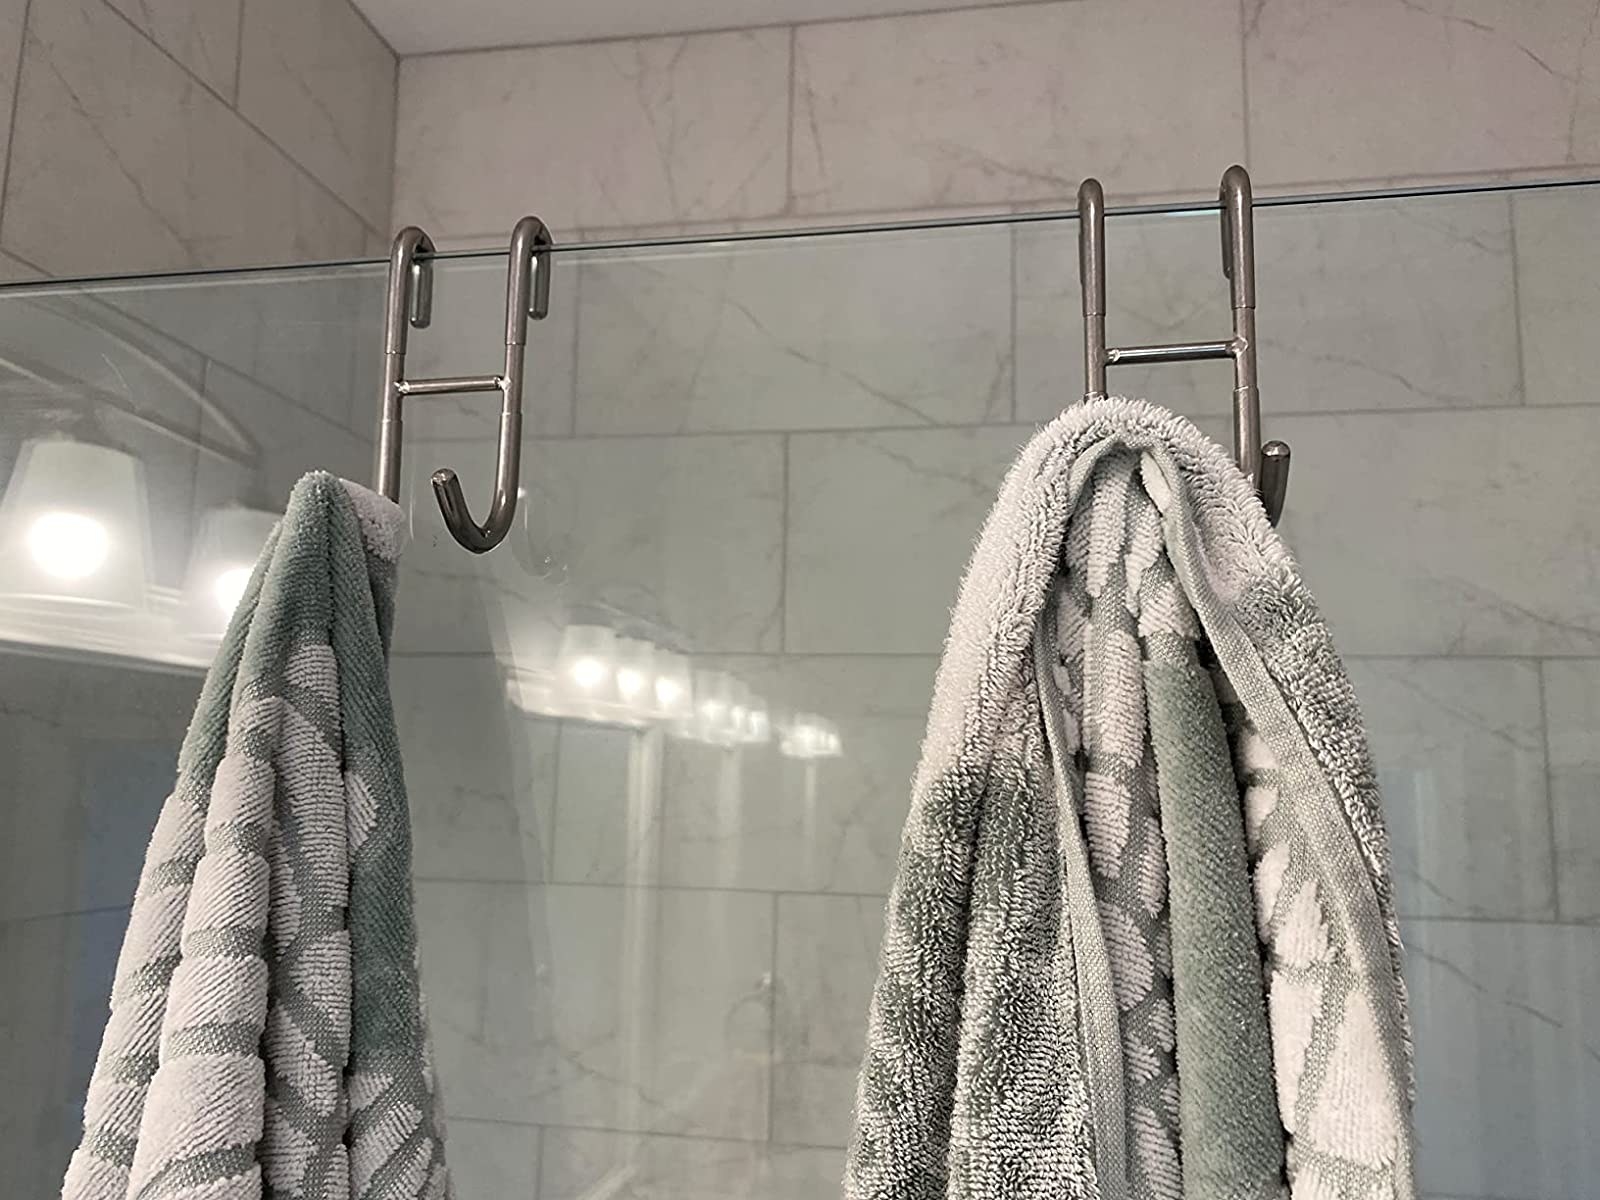 Reviewer image of two silver hooks holding towels